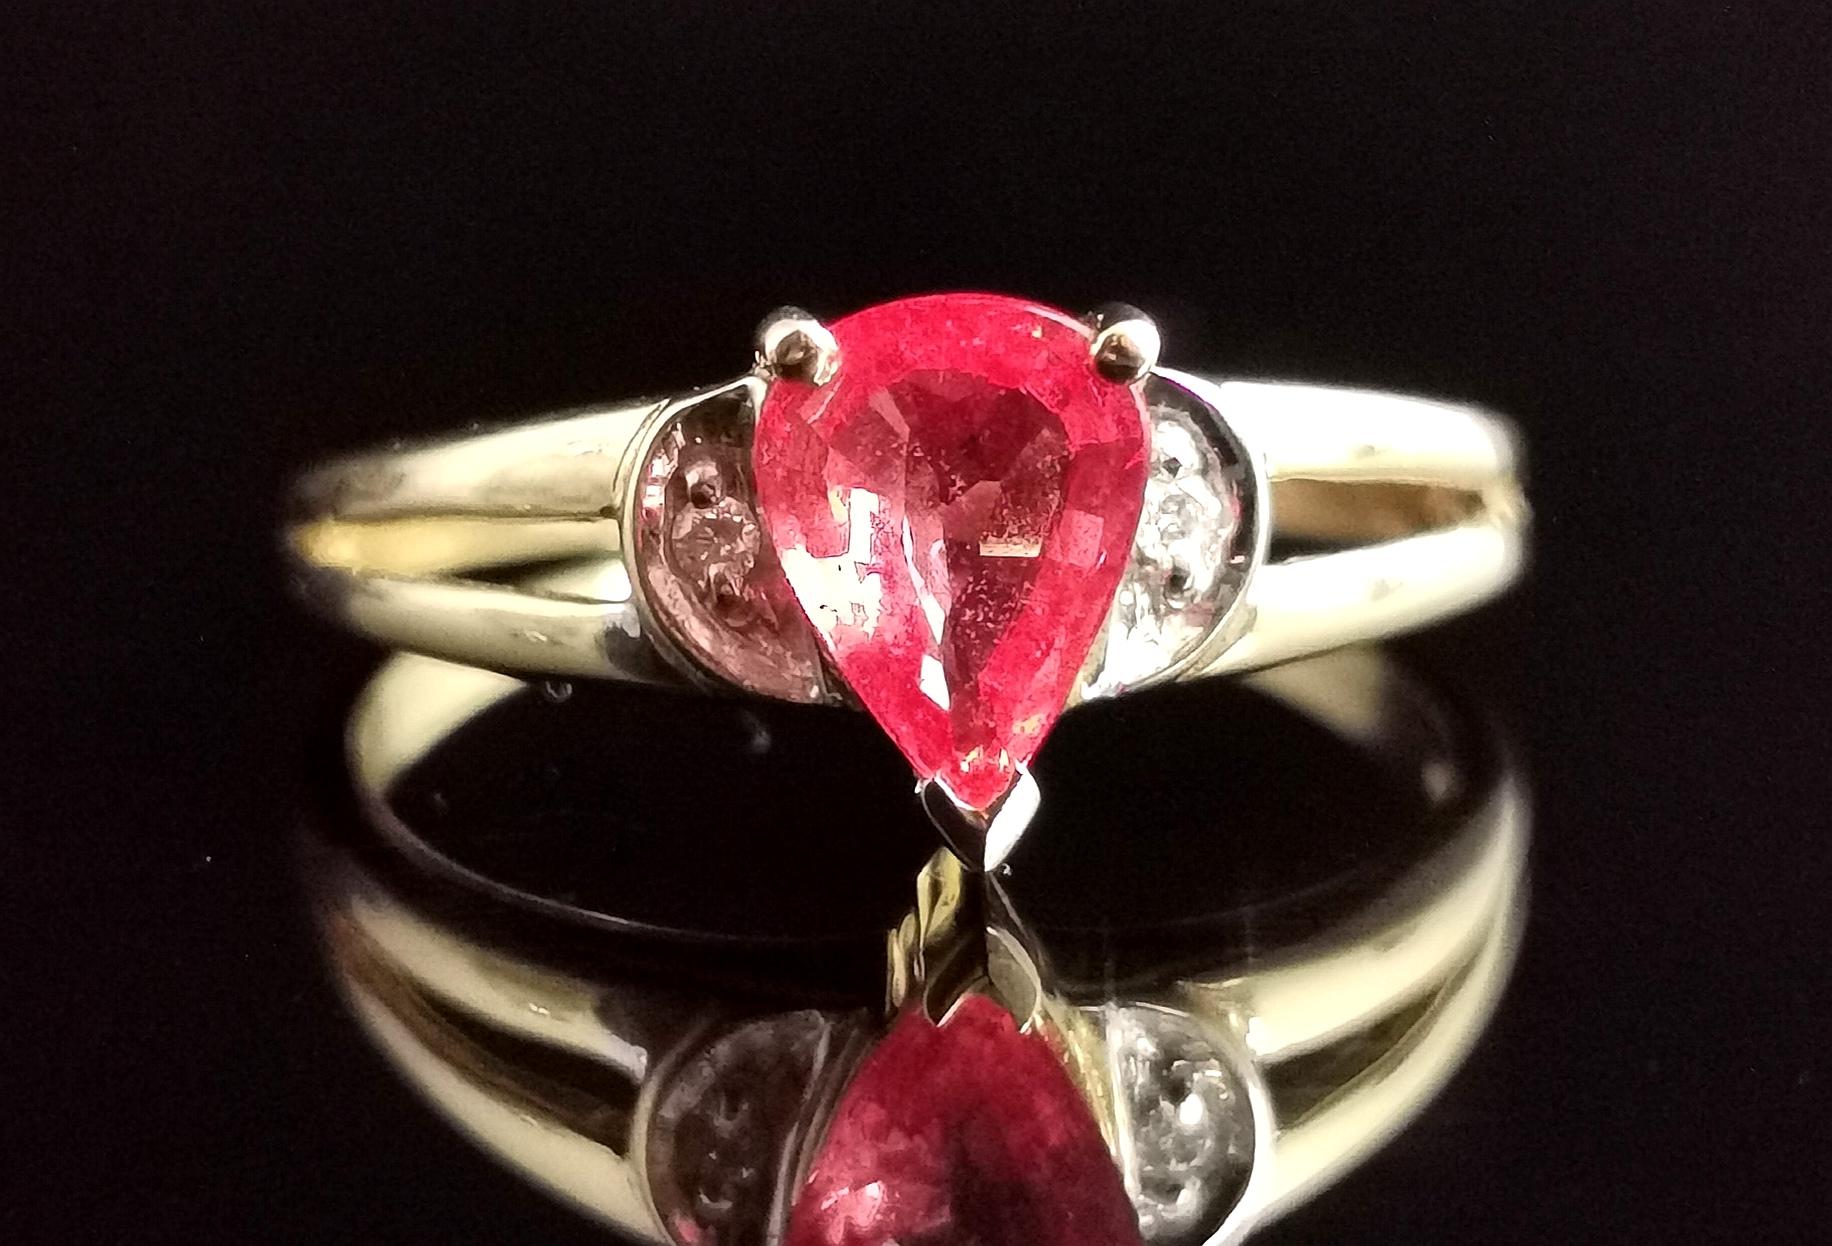 A Gorgeous vintage Orange Sapphire and Diamond ring in 18ct yellow gold.

It features a central trillion cut orange sapphire with reddish tones, similar to a blood orange colour with an approx carat weight of 0.98ct.

It has crisp white diamond